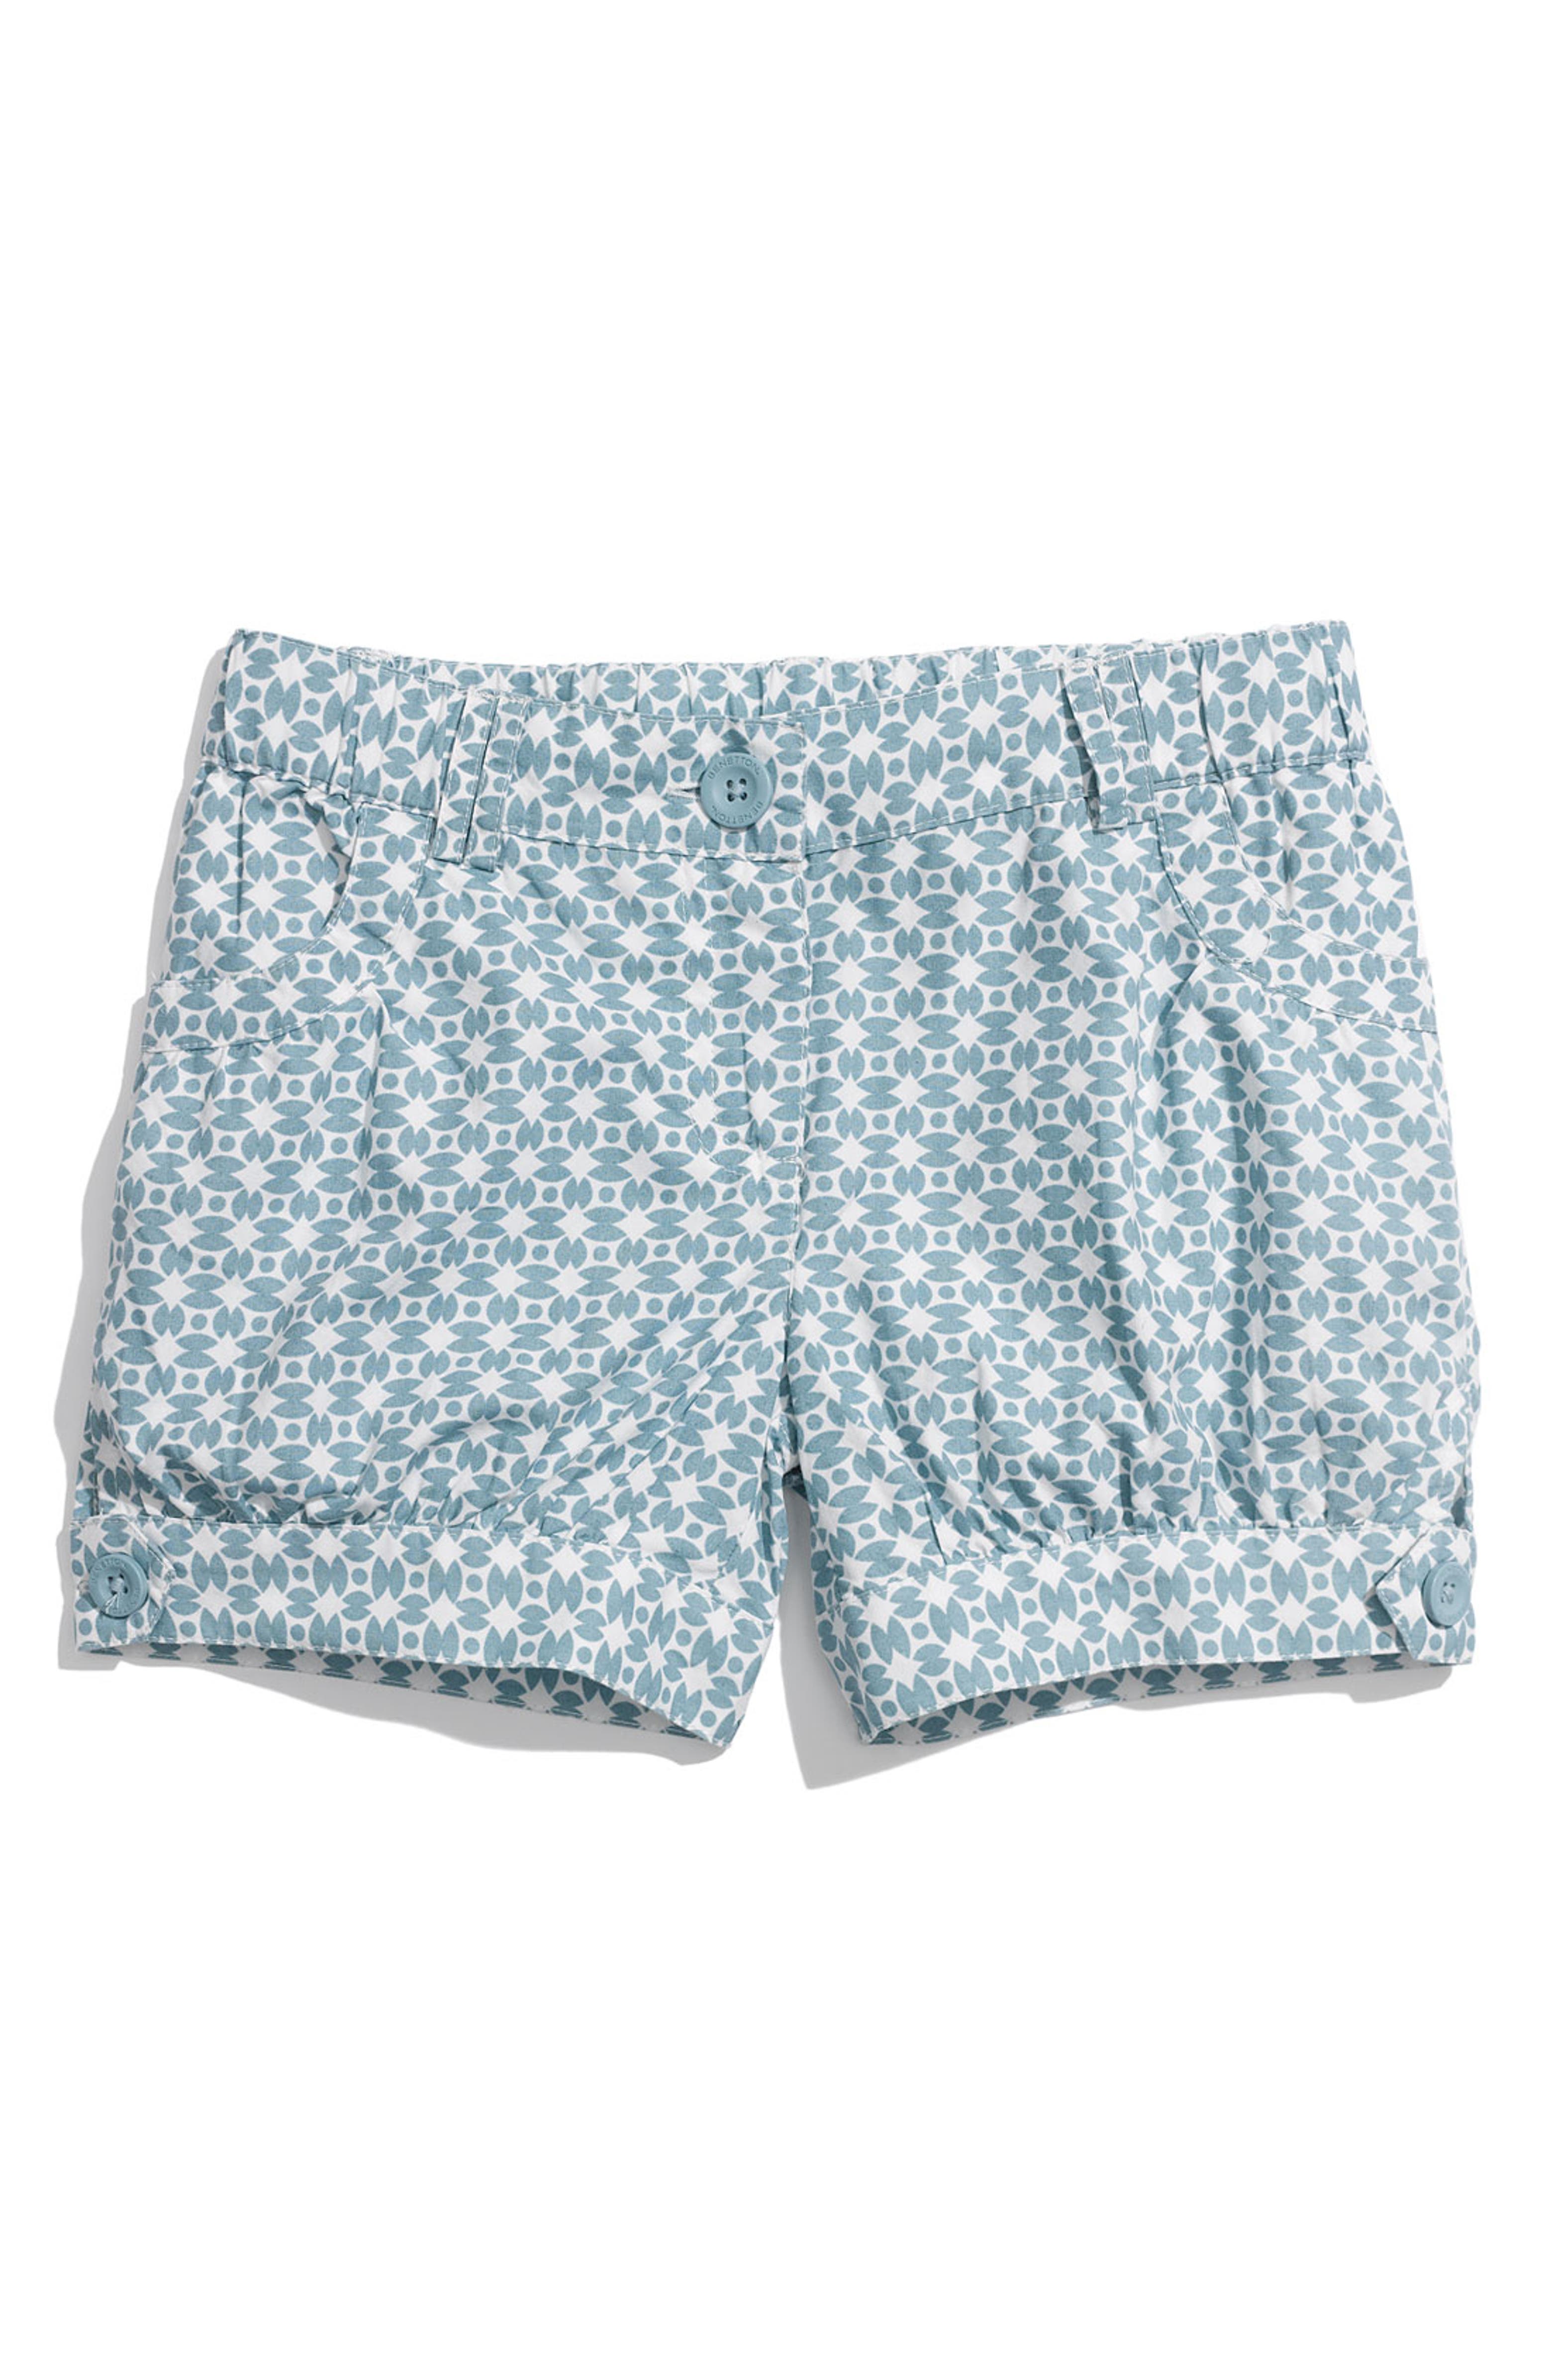 United Colors of Benetton Kids Printed Shorts (Toddler) | Nordstrom